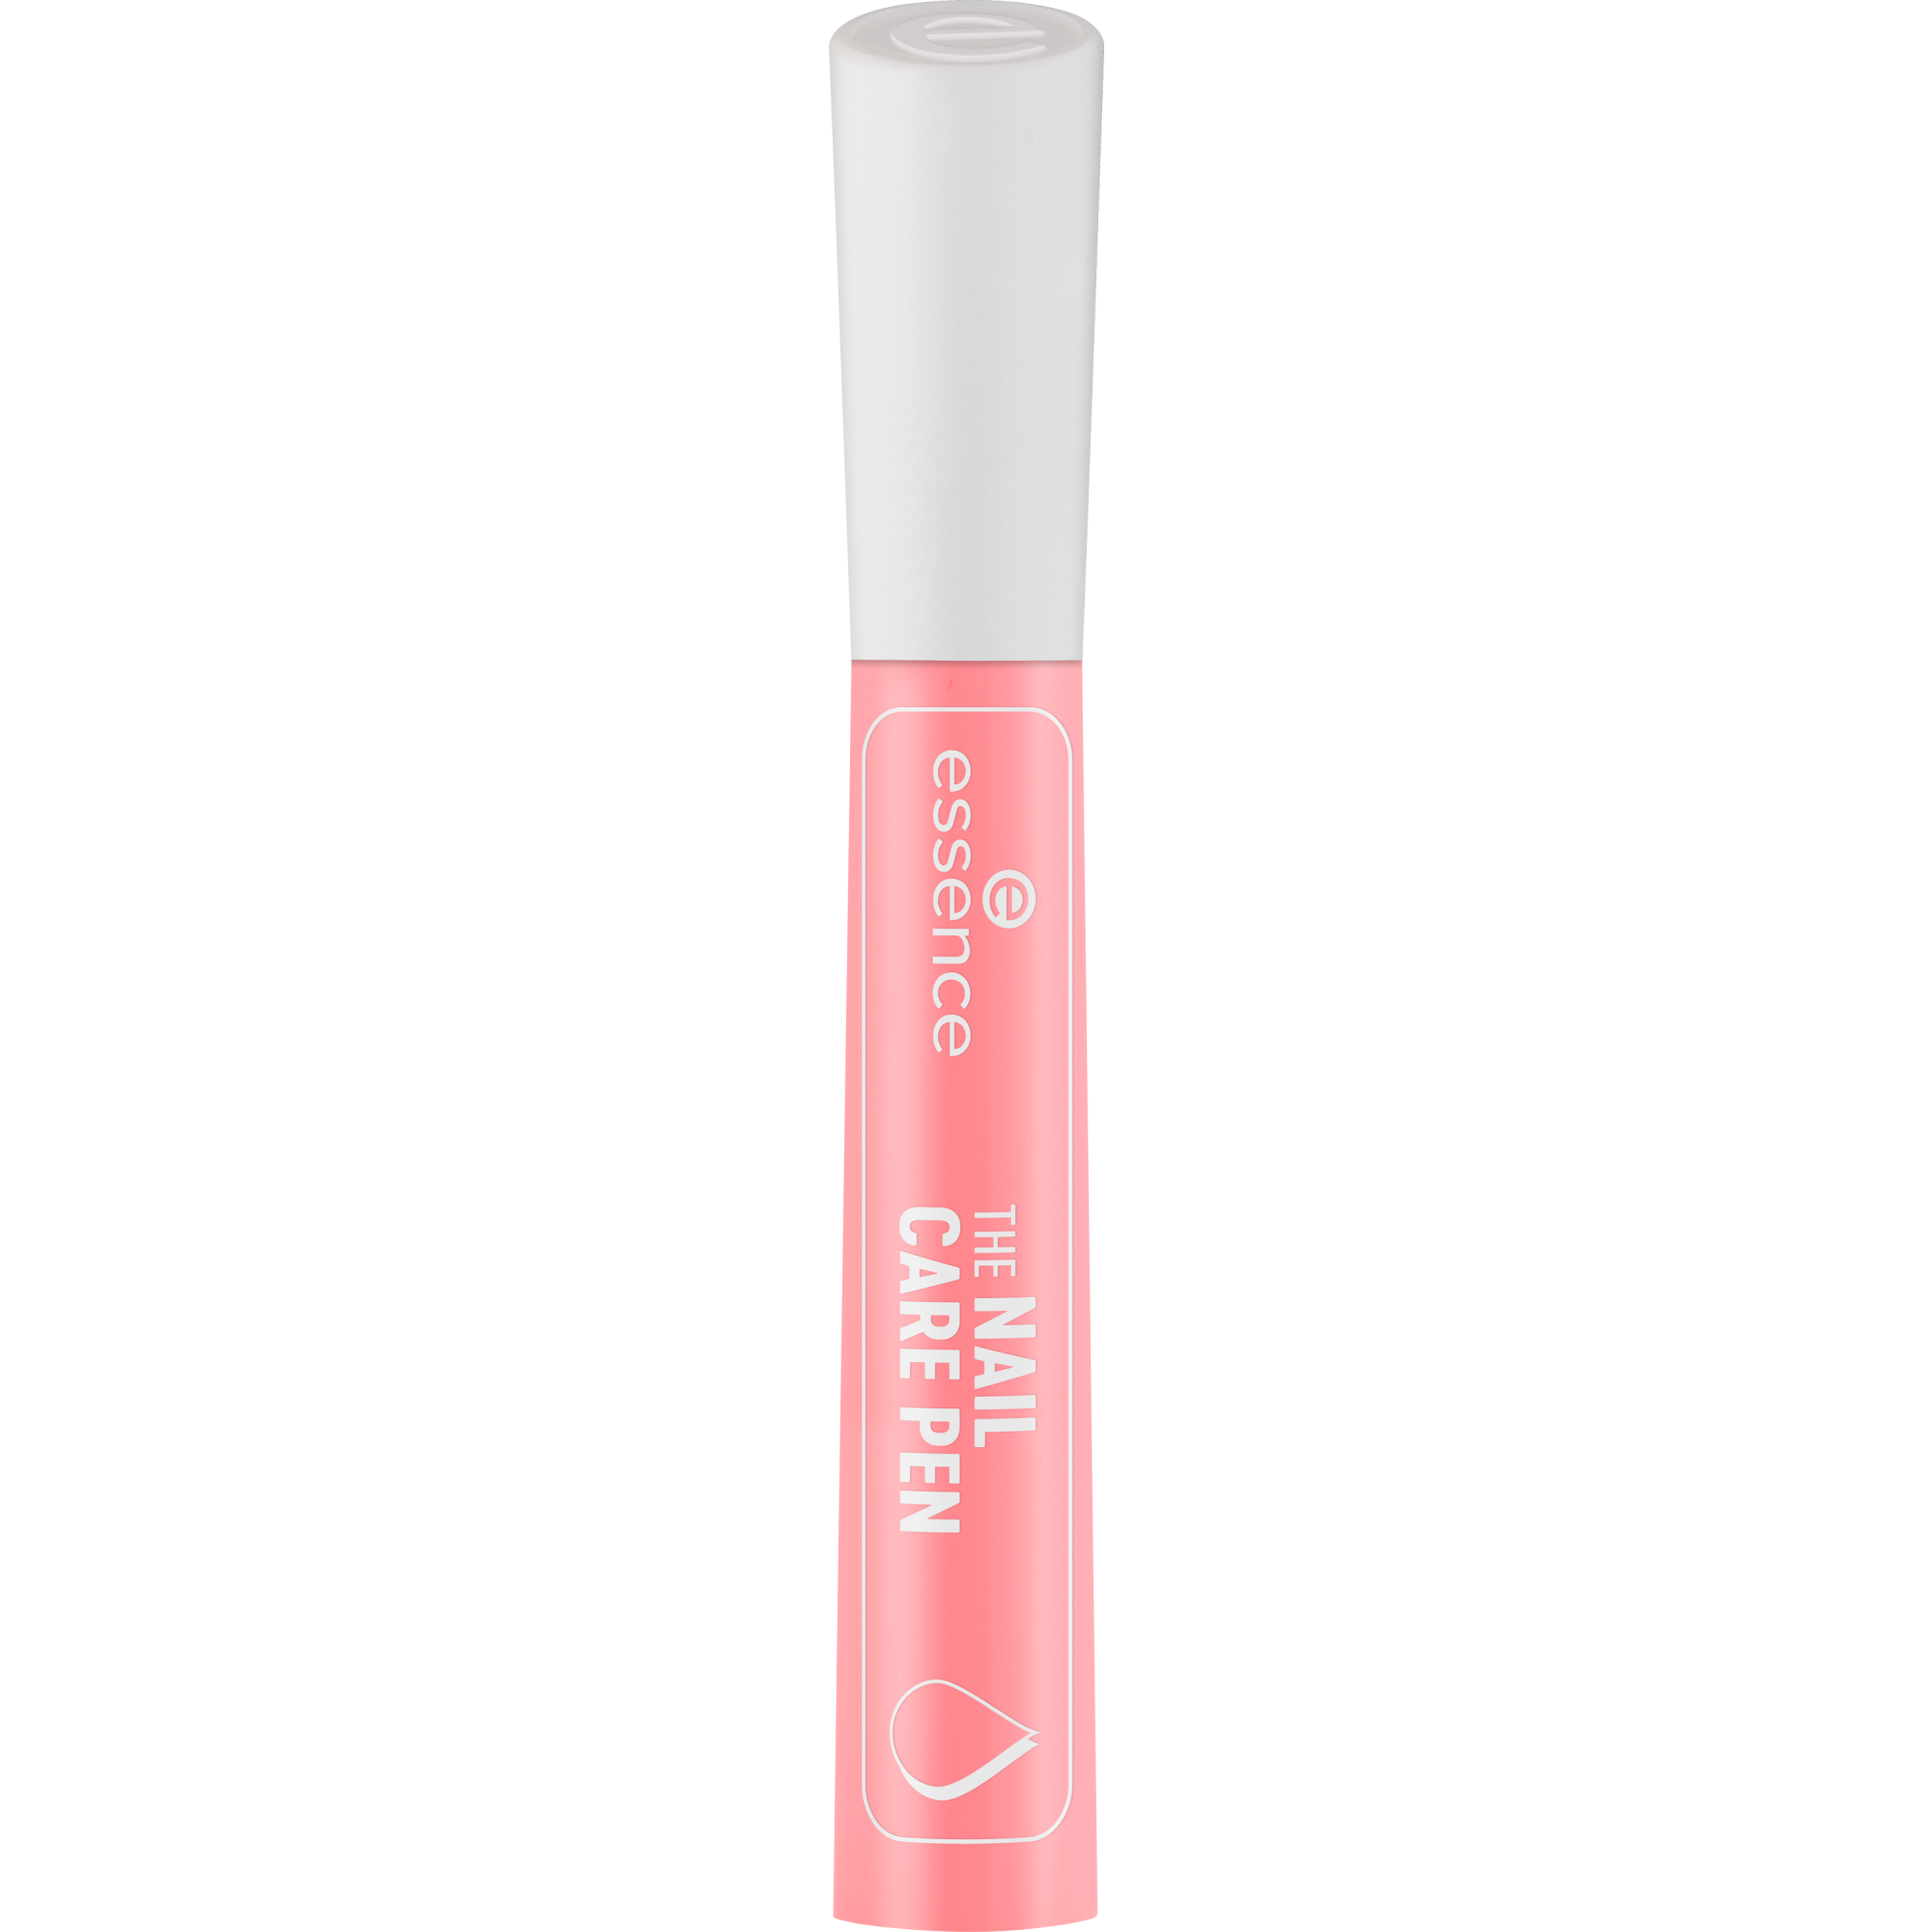 THE NAIL CARE PEN stylo soin des ongles